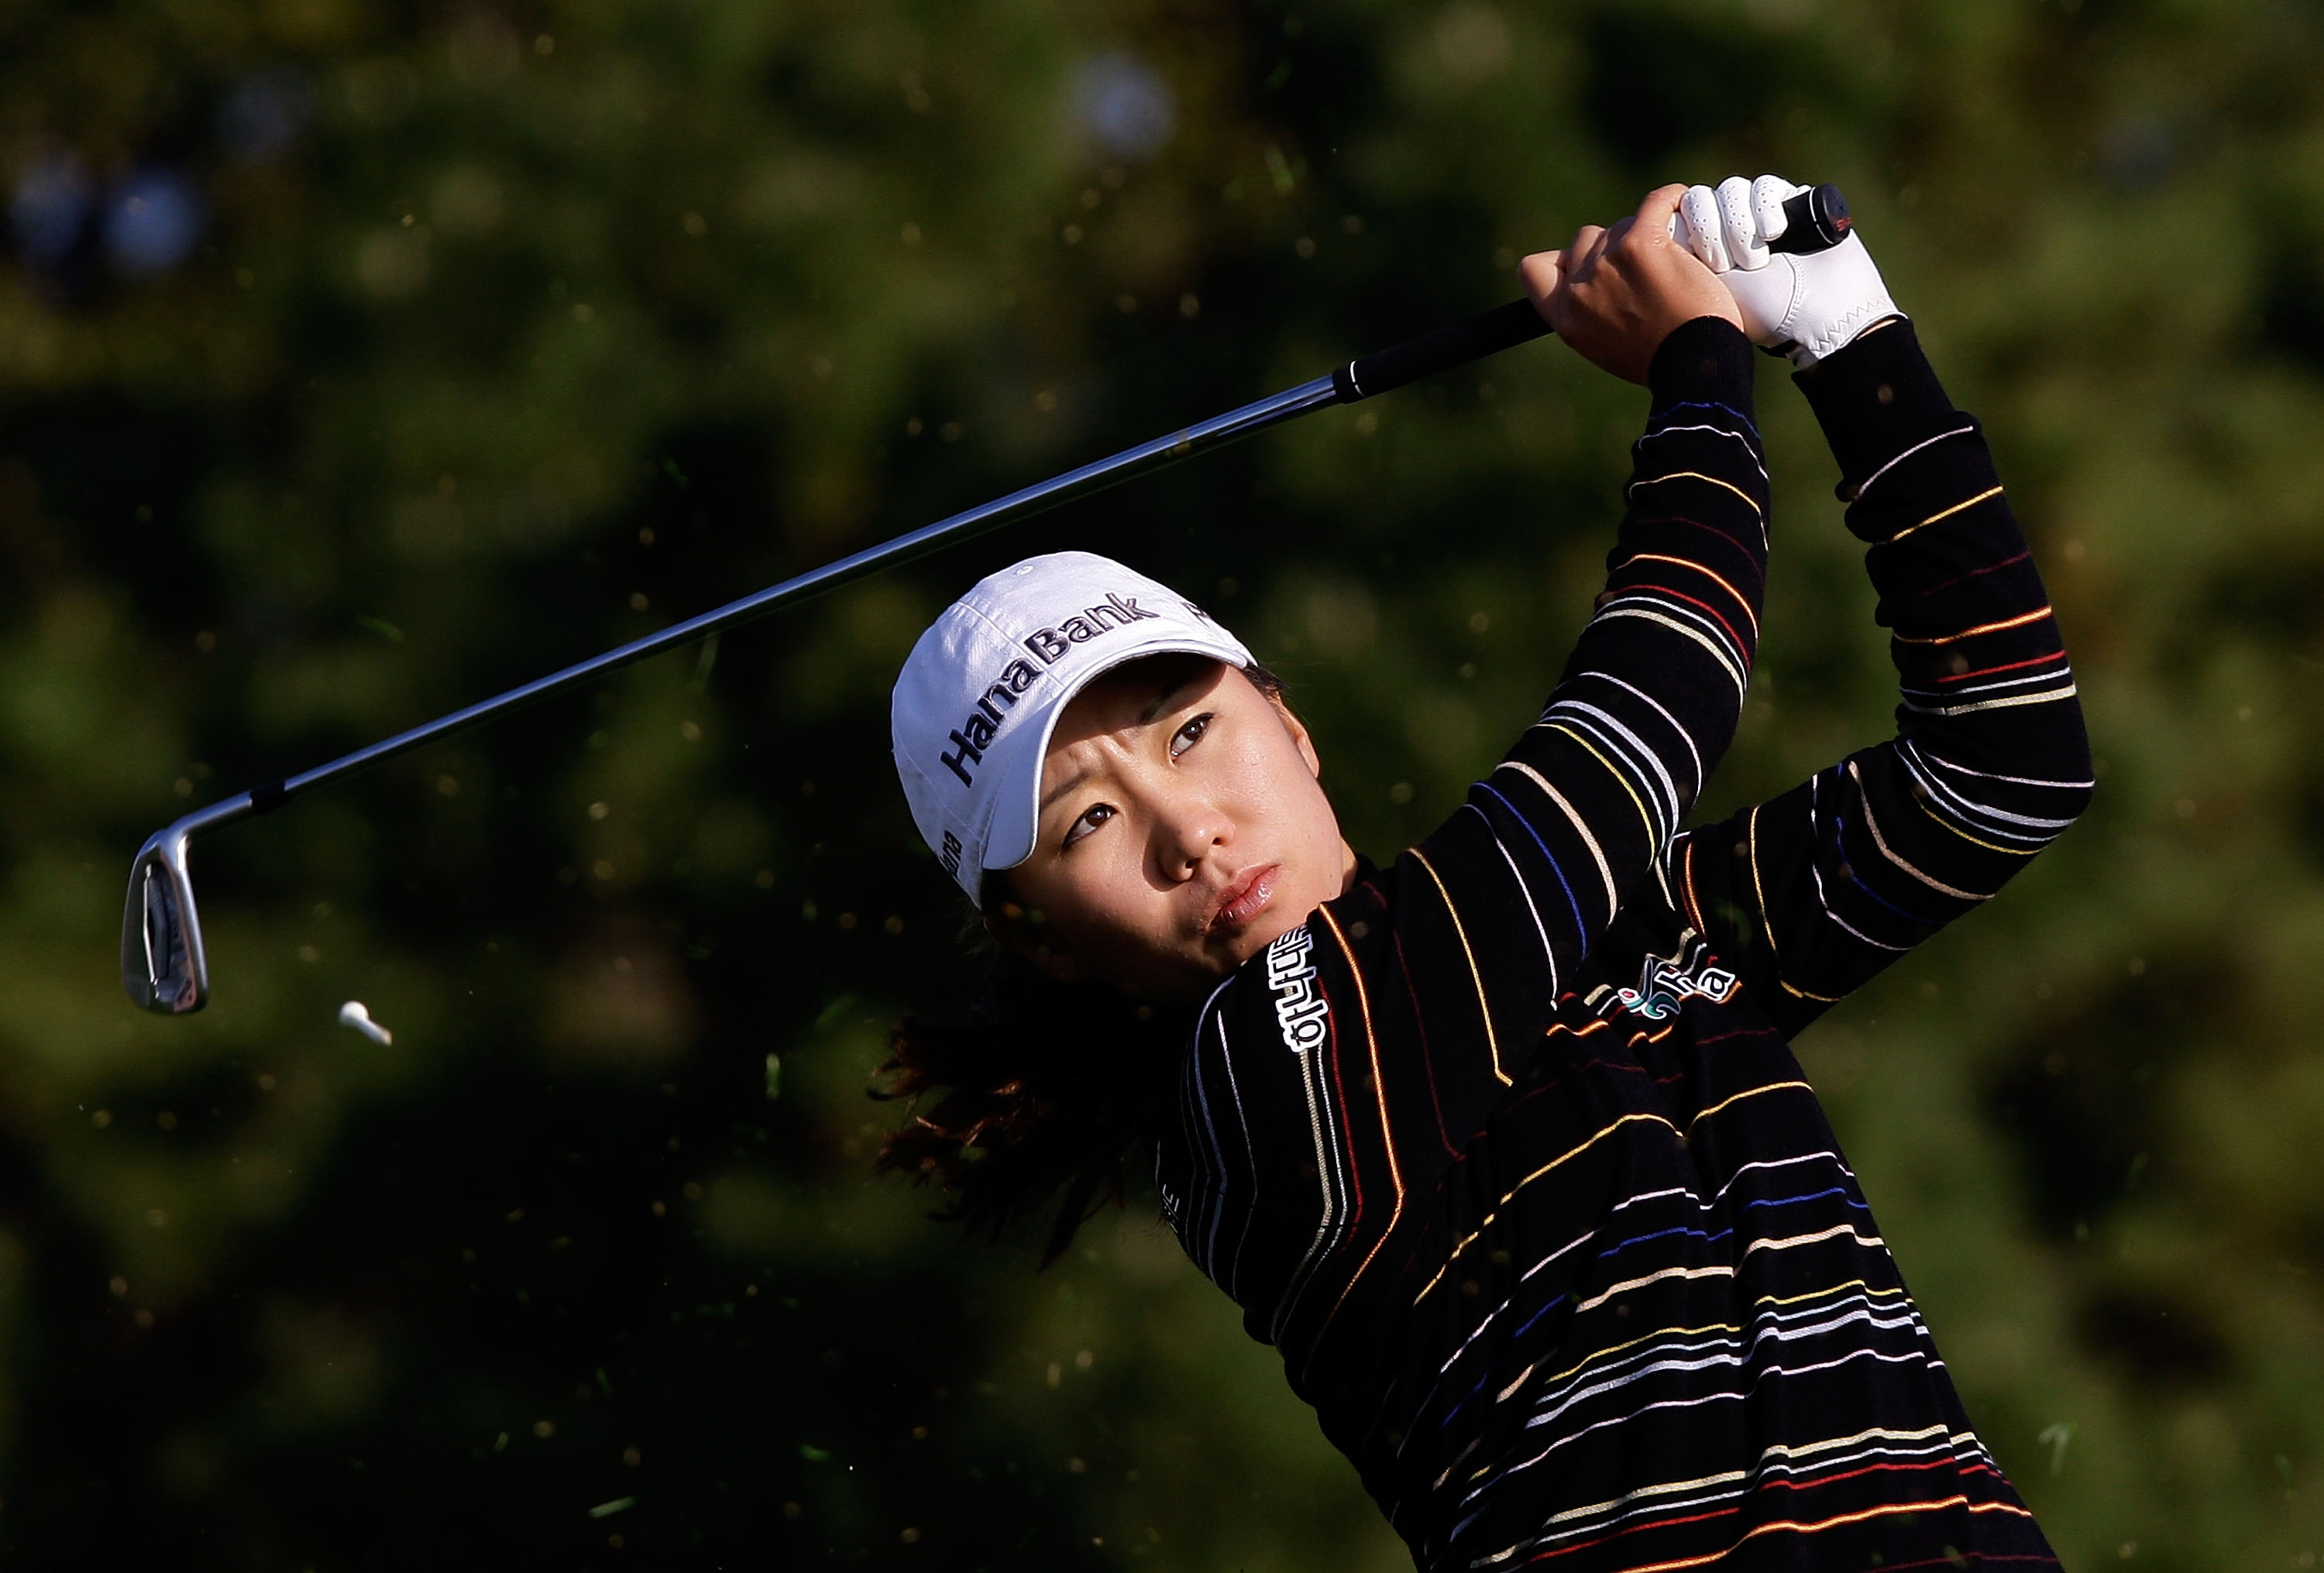 INCHEON, SOUTH KOREA - OCTOBER 30:  Kim In-Kyung of South Korea hits a tee shot on the 3rd hole during the 2010 LPGA Hana Bank Championship at Sky 72 Golf Club on October 30, 2010 in Incheon, South Korea.  (Photo by Chung Sung-Jun/Getty Images)